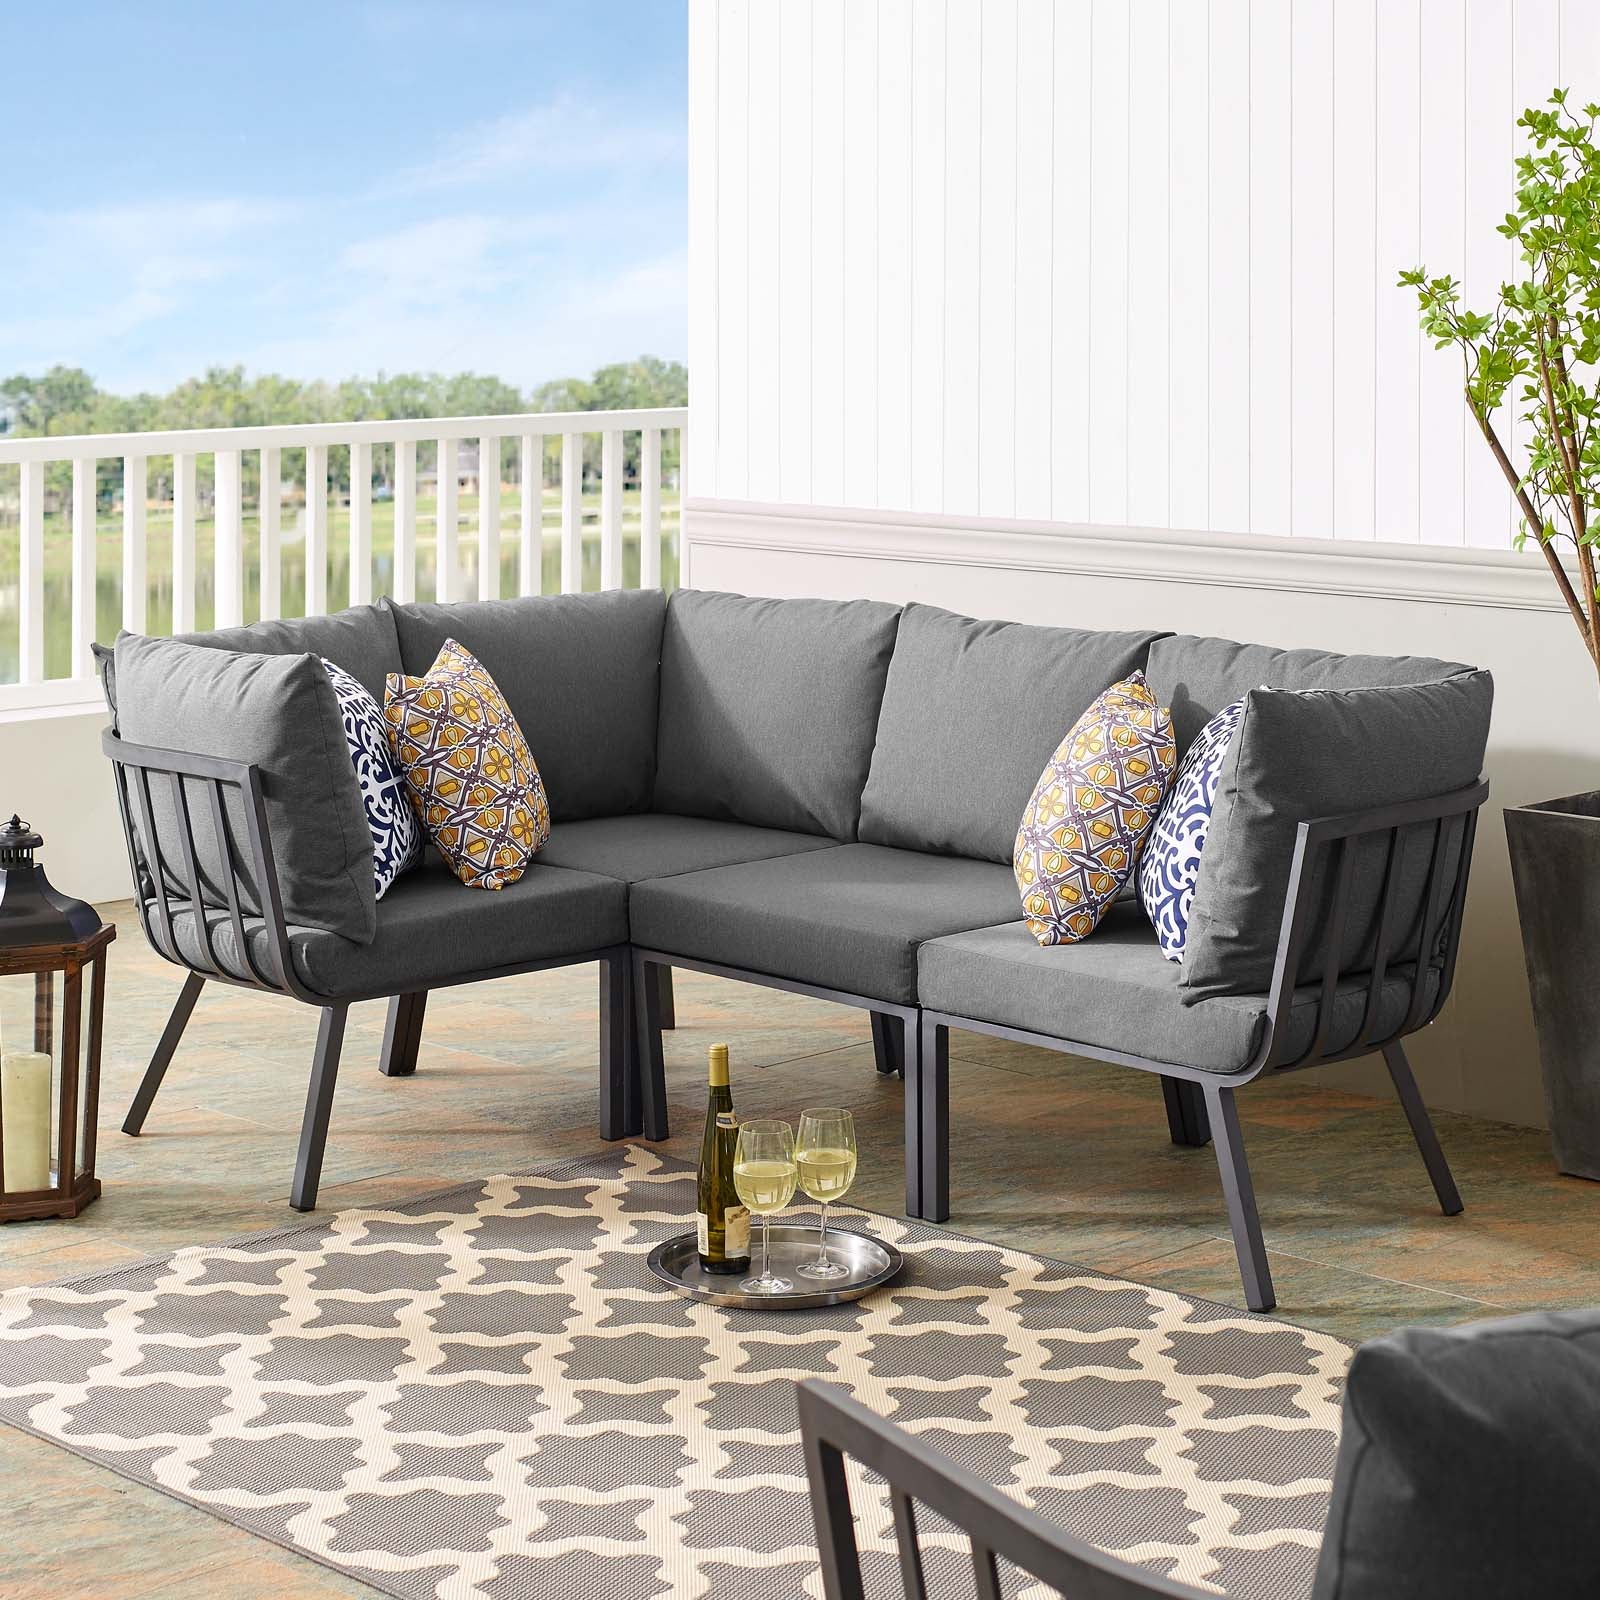 Modway Outdoor Sofas - Riverside 4 Piece Outdoor Patio Aluminum Sectional Gray Charcoal